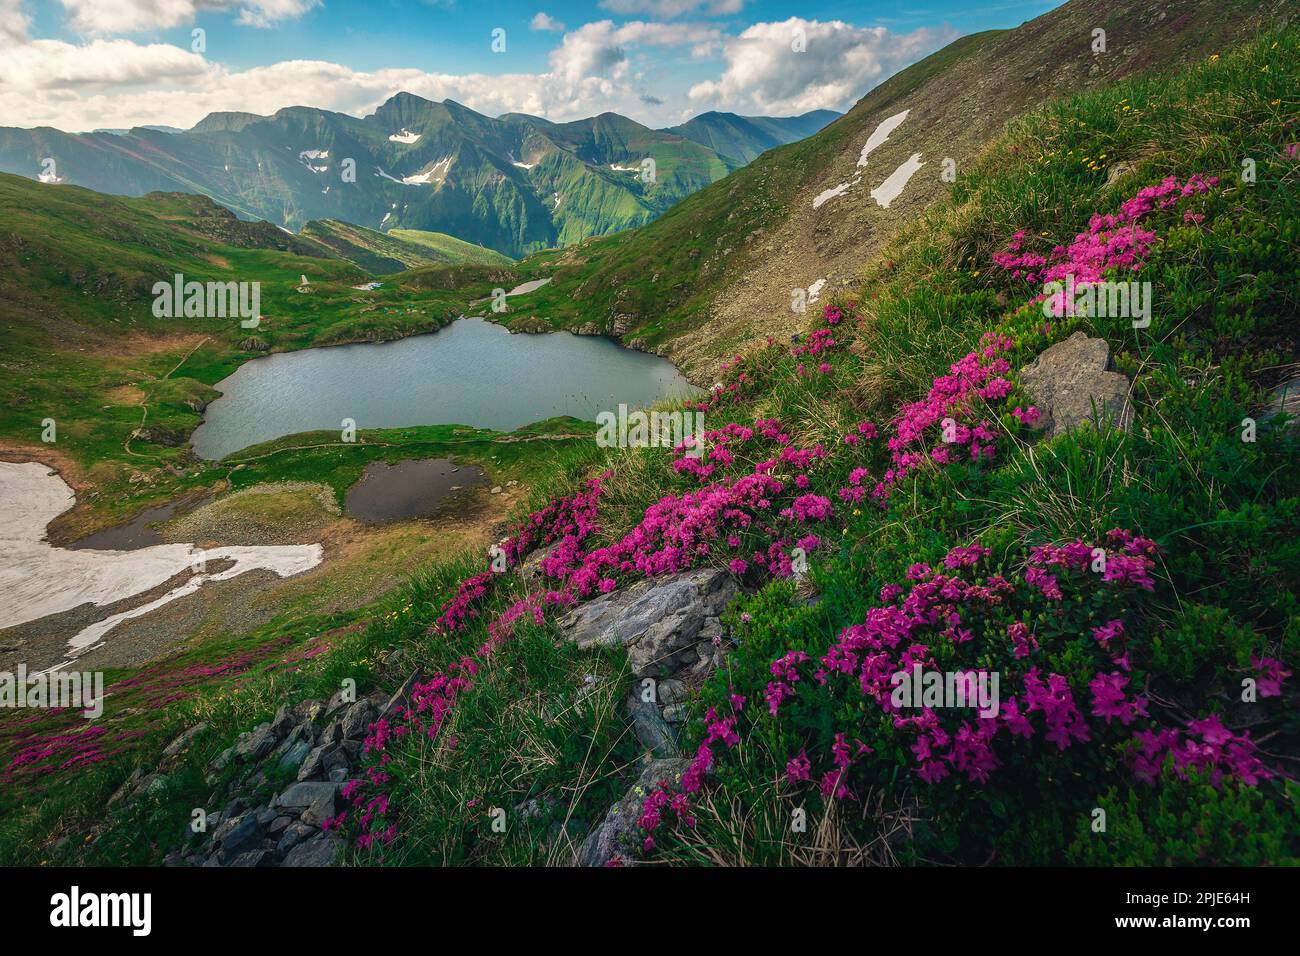 One of the most visited nature scenery at early summer. Spectacular view with lake Capra and blooming rhododendron flowers on the hills, Fagaras mount Stock Photo